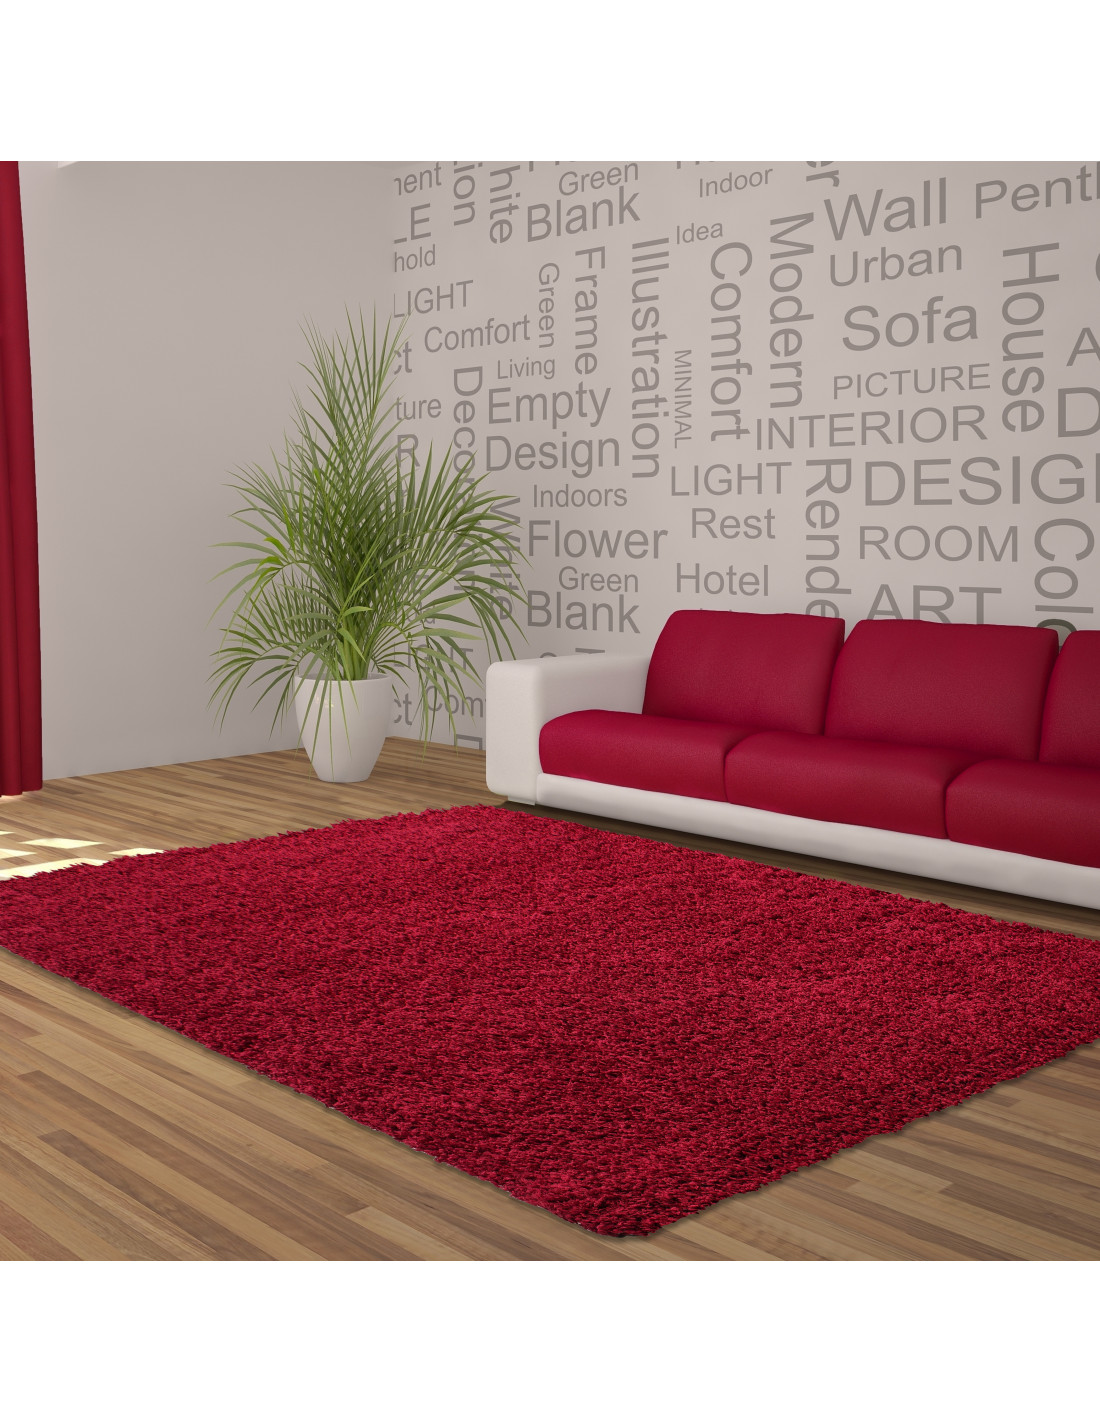 Deep pile long pile living room DREAM Shaggy rug uni color pile height 5cm red